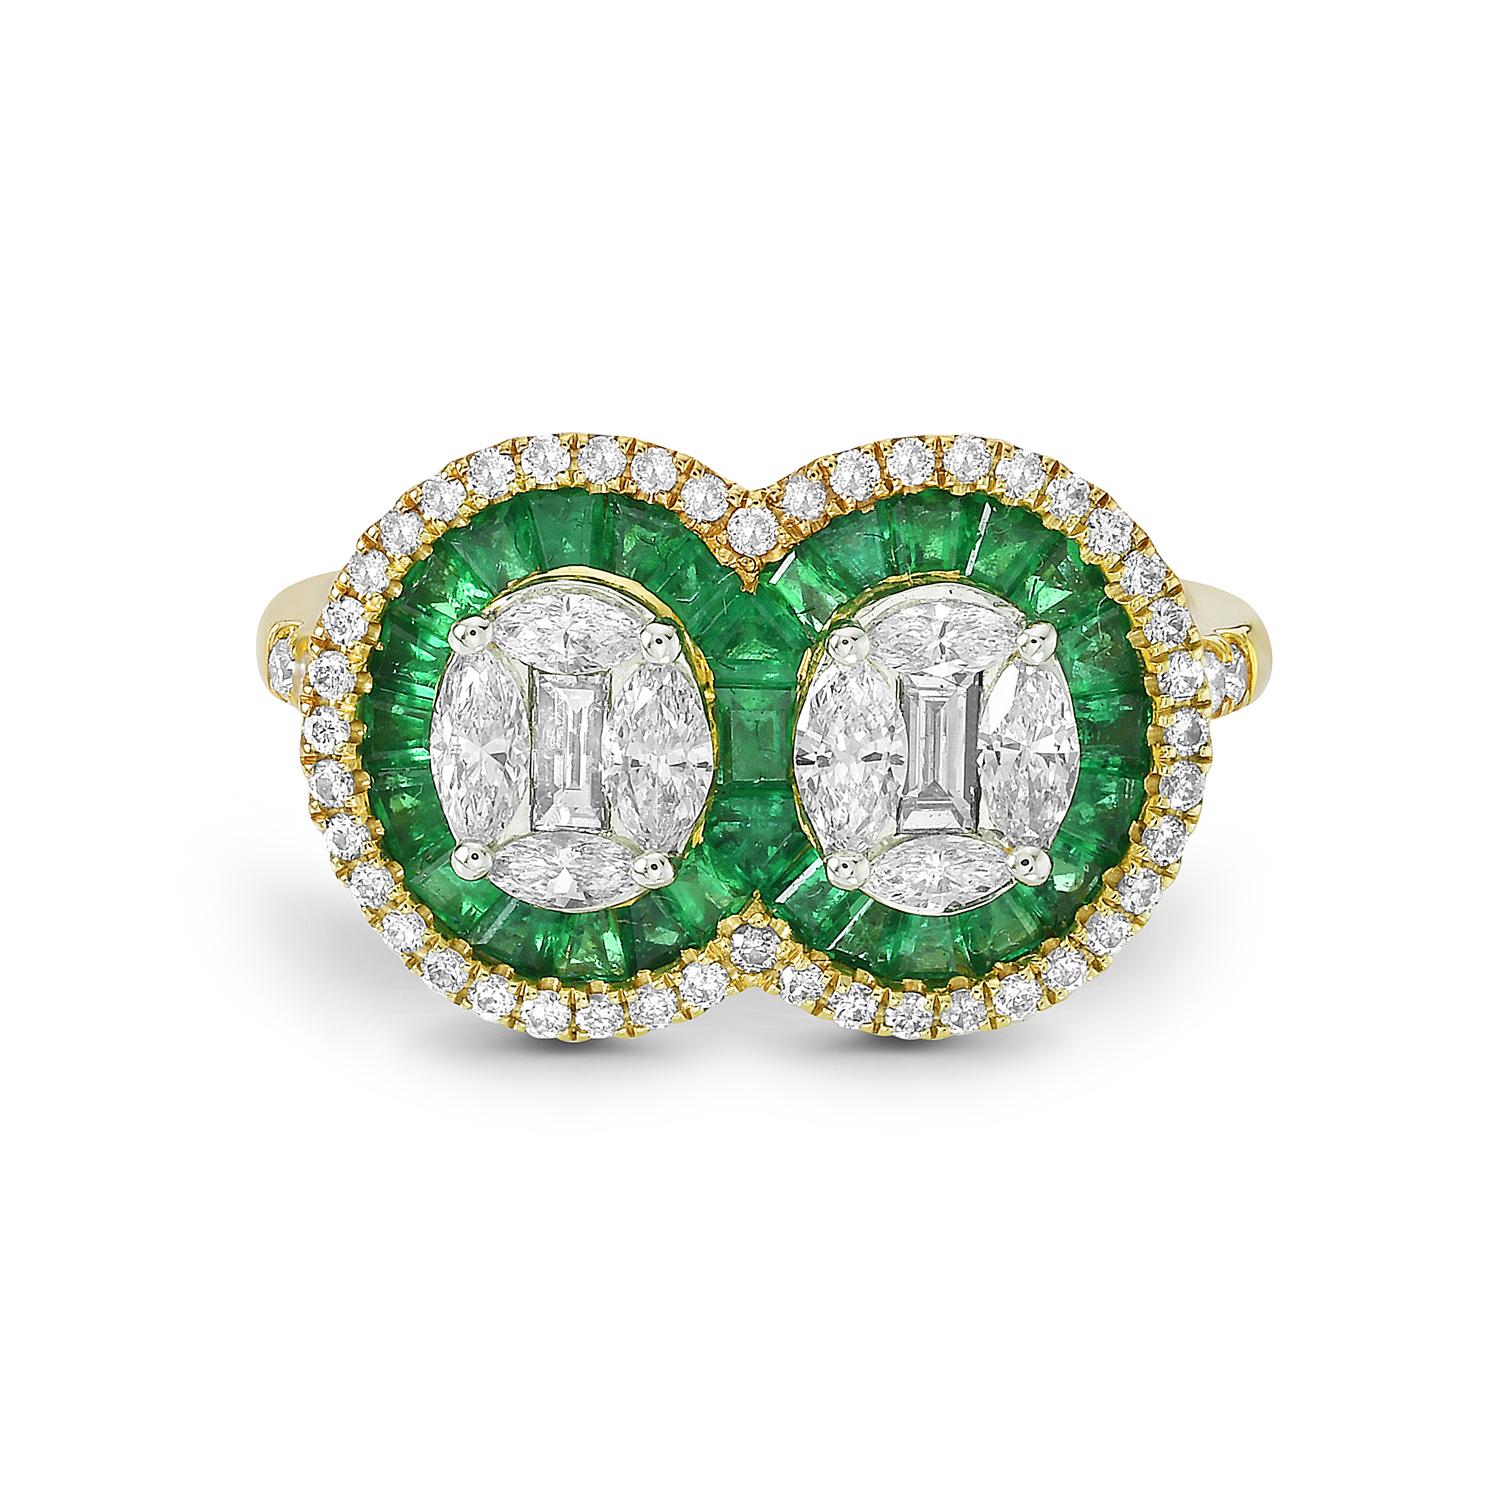 Mixed Cut Twin Ring With Emerald & Diamonds Made In 18k Gold For Sale